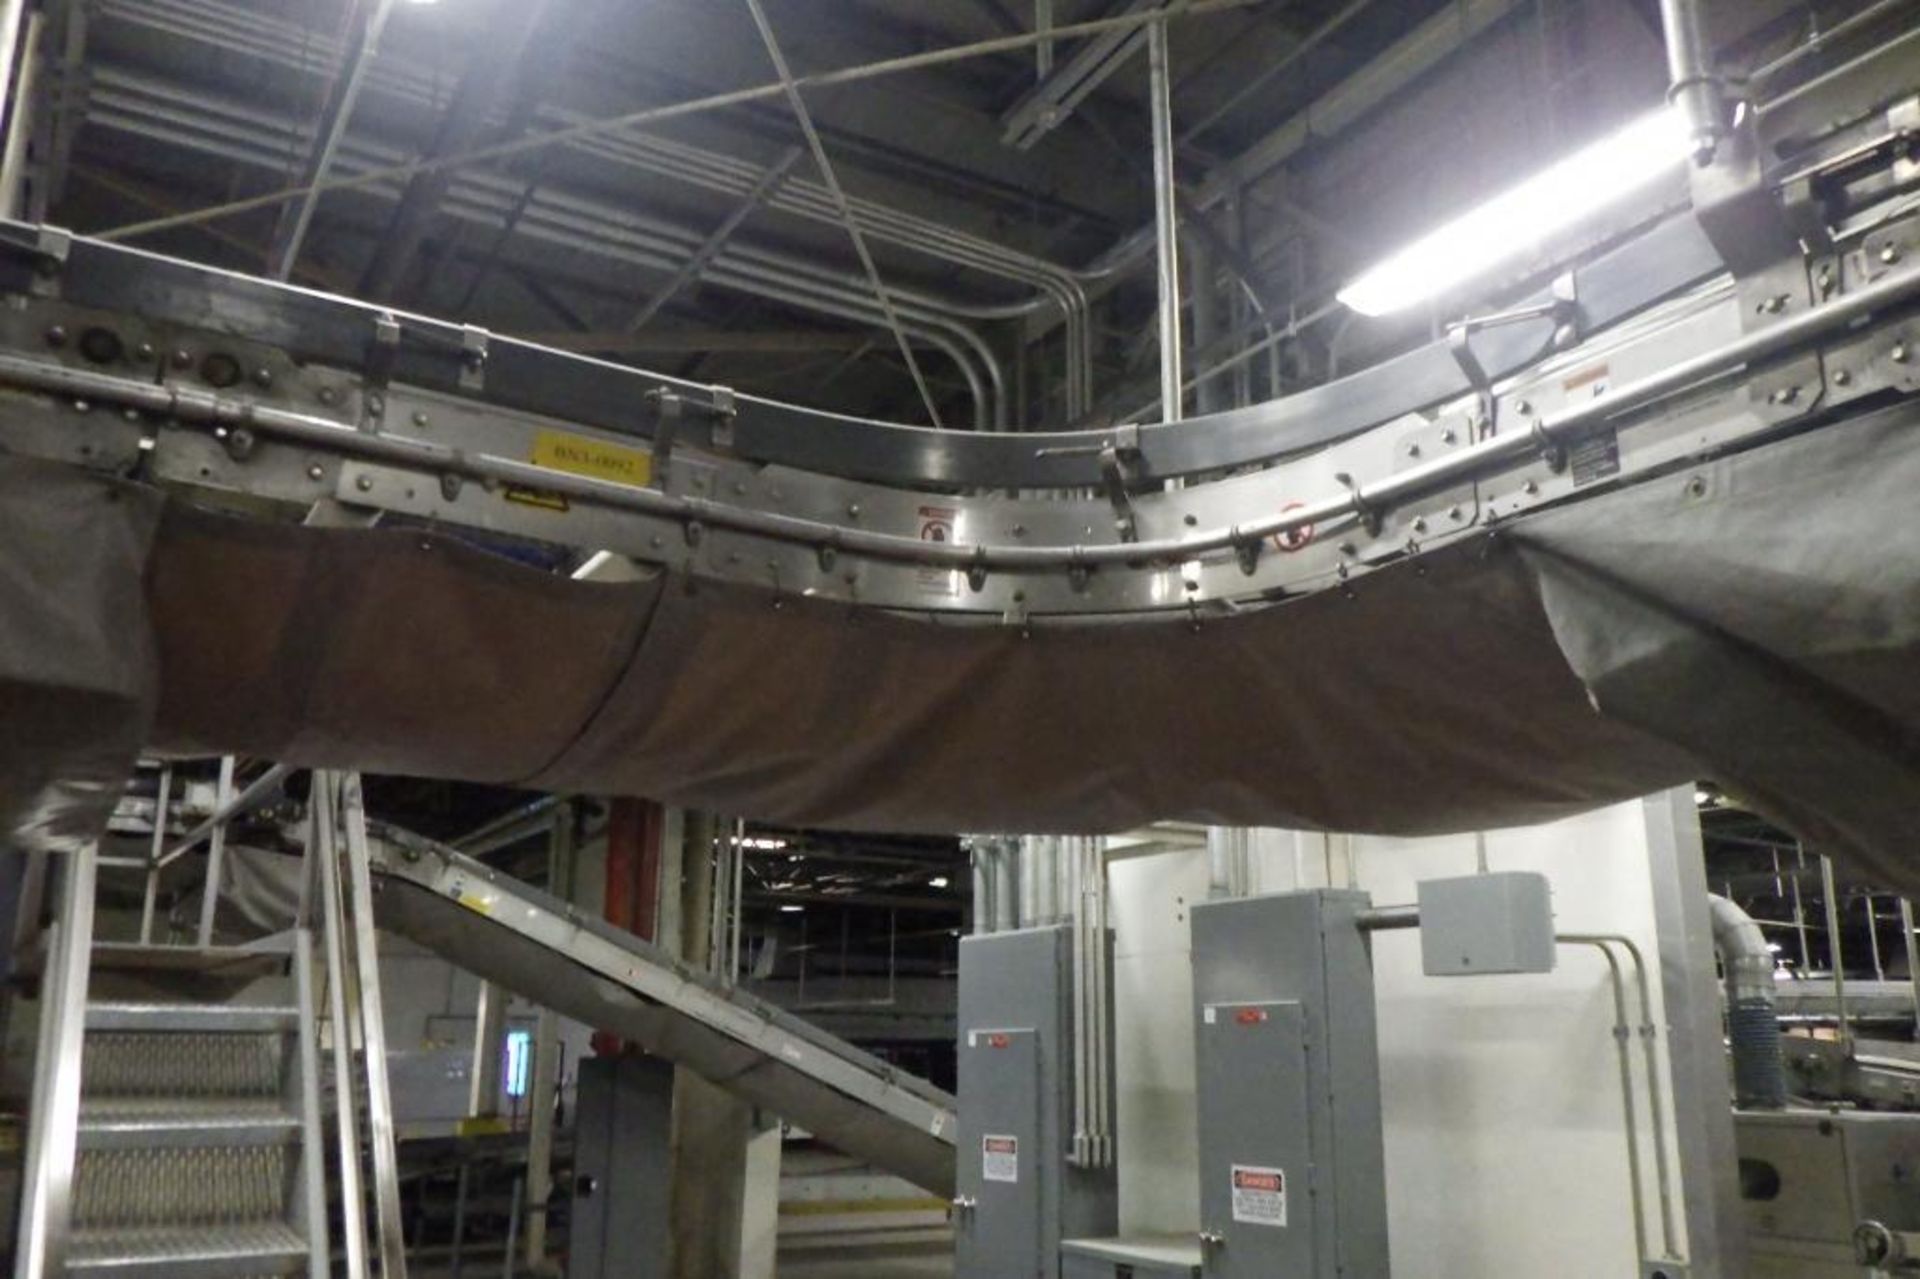 Stewart systems empty pan conveyor - Image 12 of 27